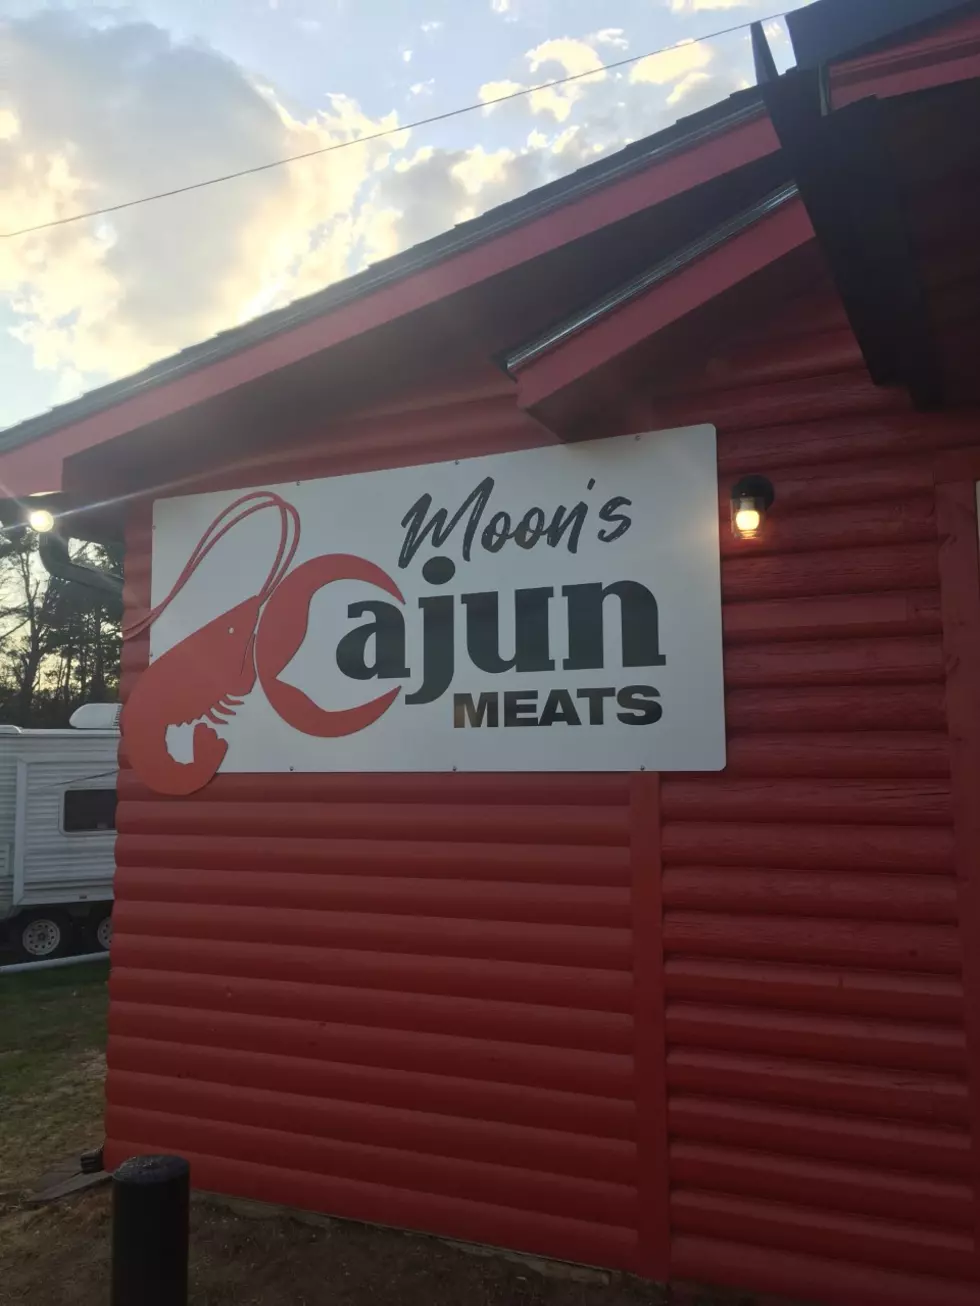 It’s Official! Moon’s Cajun Meats Is Now Open In Nacogdoches!